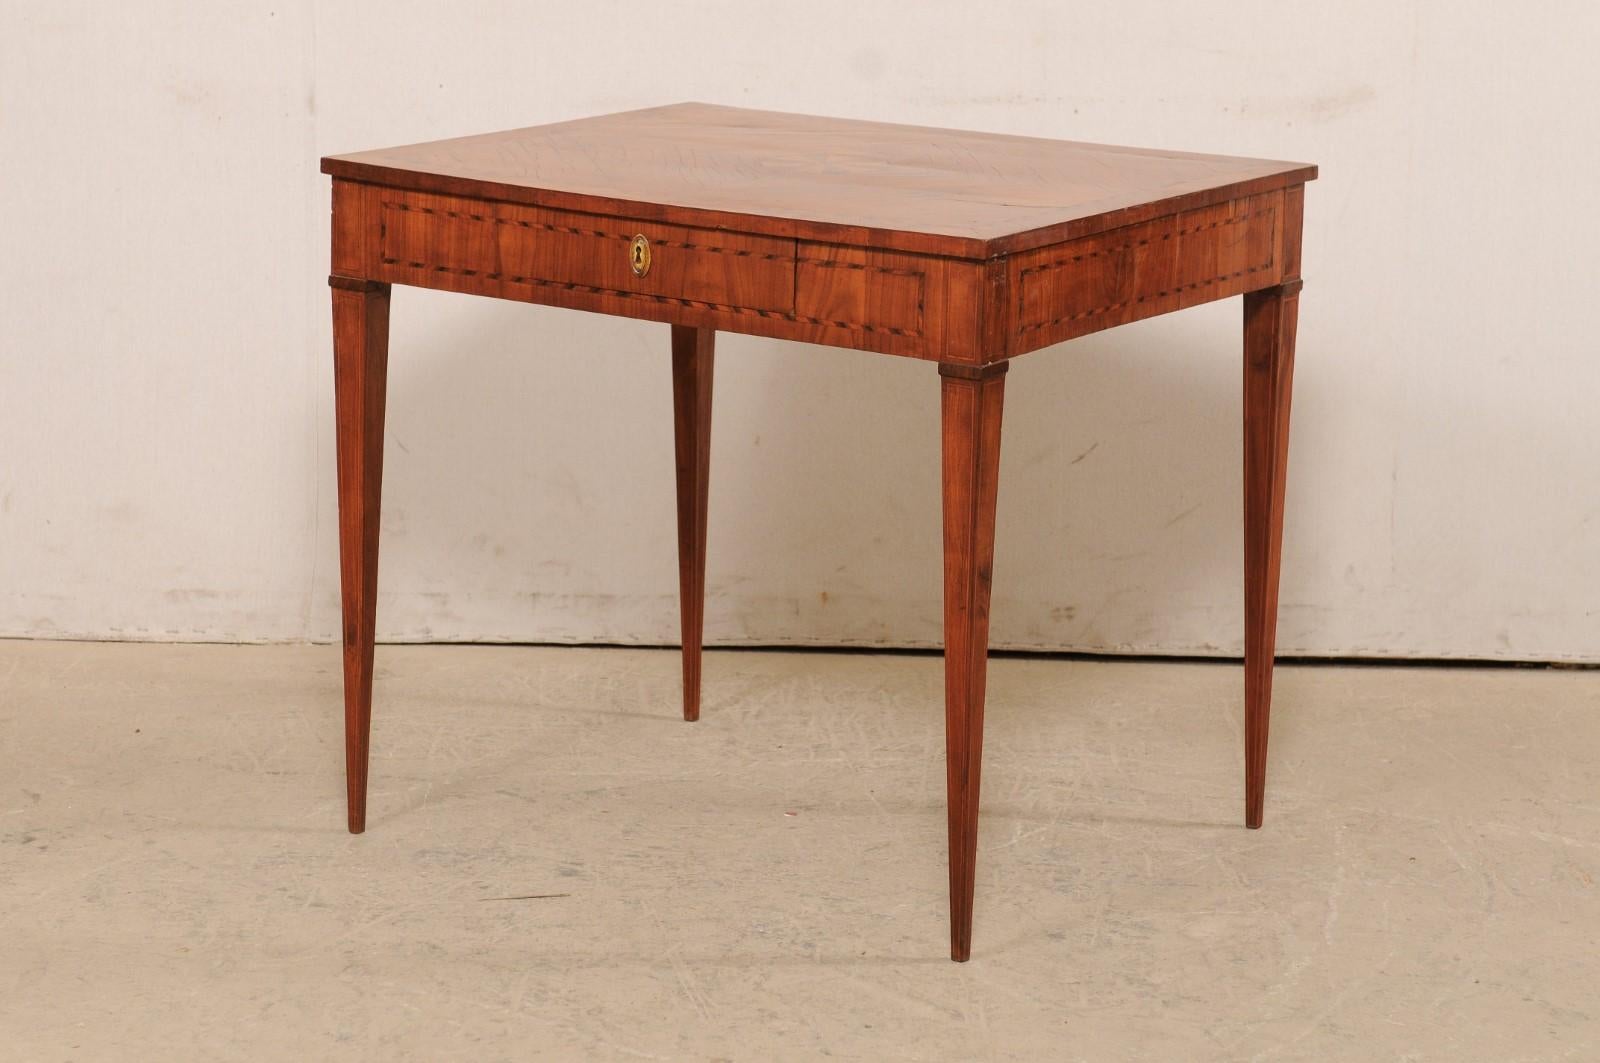 Italian Occasional Table with Floral Medallion Inlay Adorning Top, Early 19th C For Sale 5